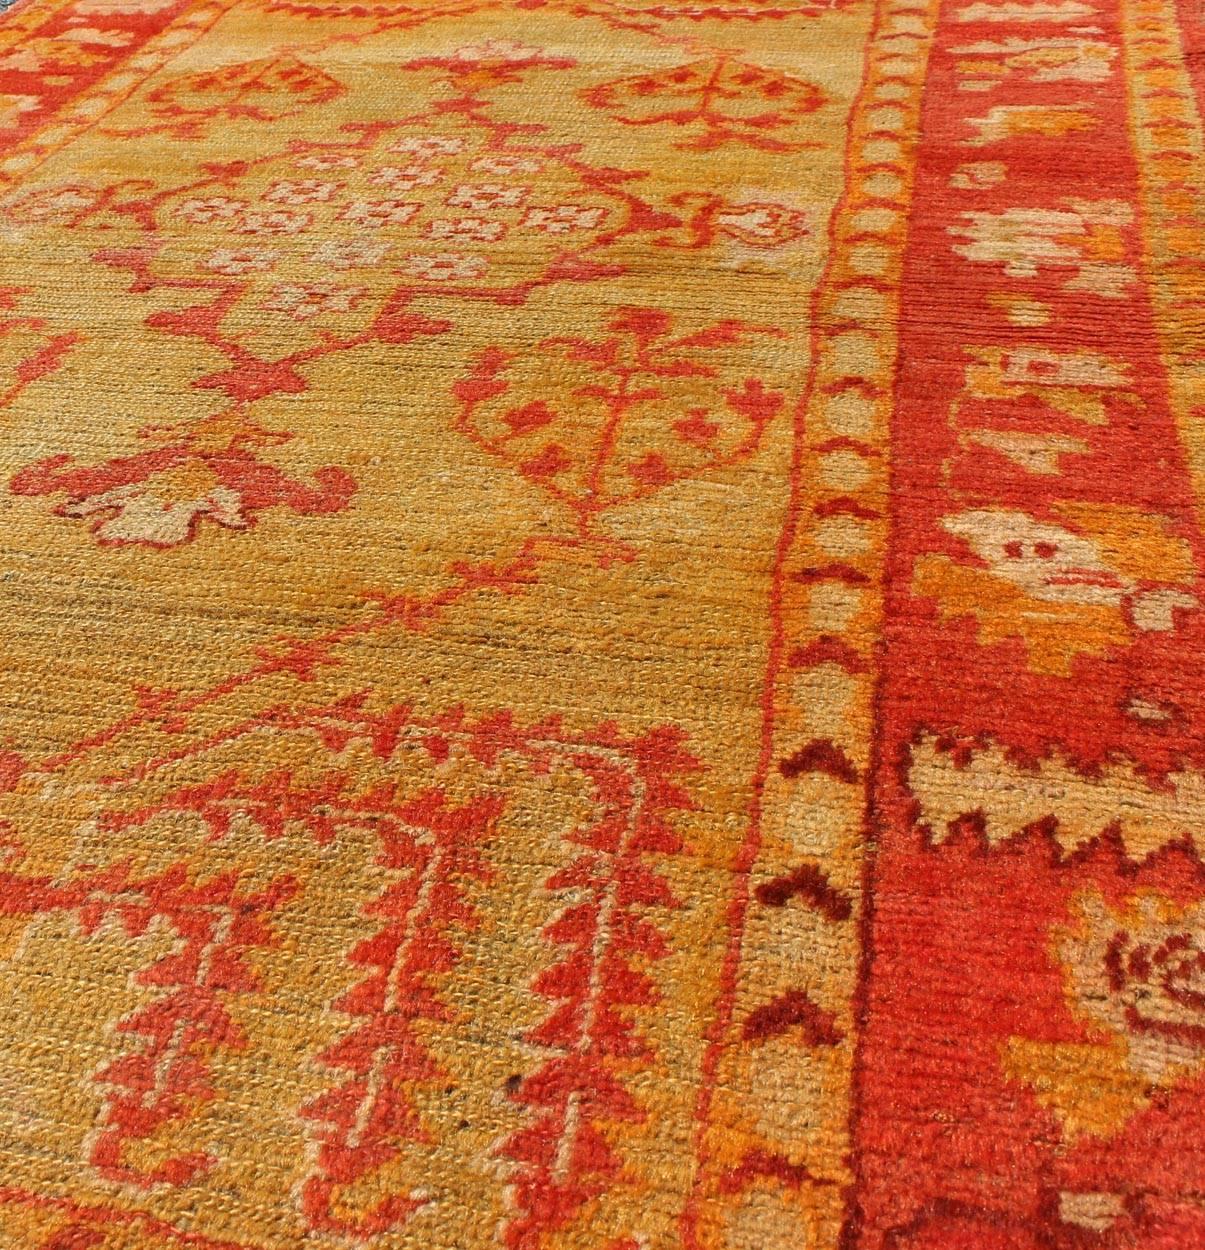 Antique Turkish Oushak Rug With Willow Trees Design in Orange Red & Yellow-Green In Good Condition For Sale In Atlanta, GA